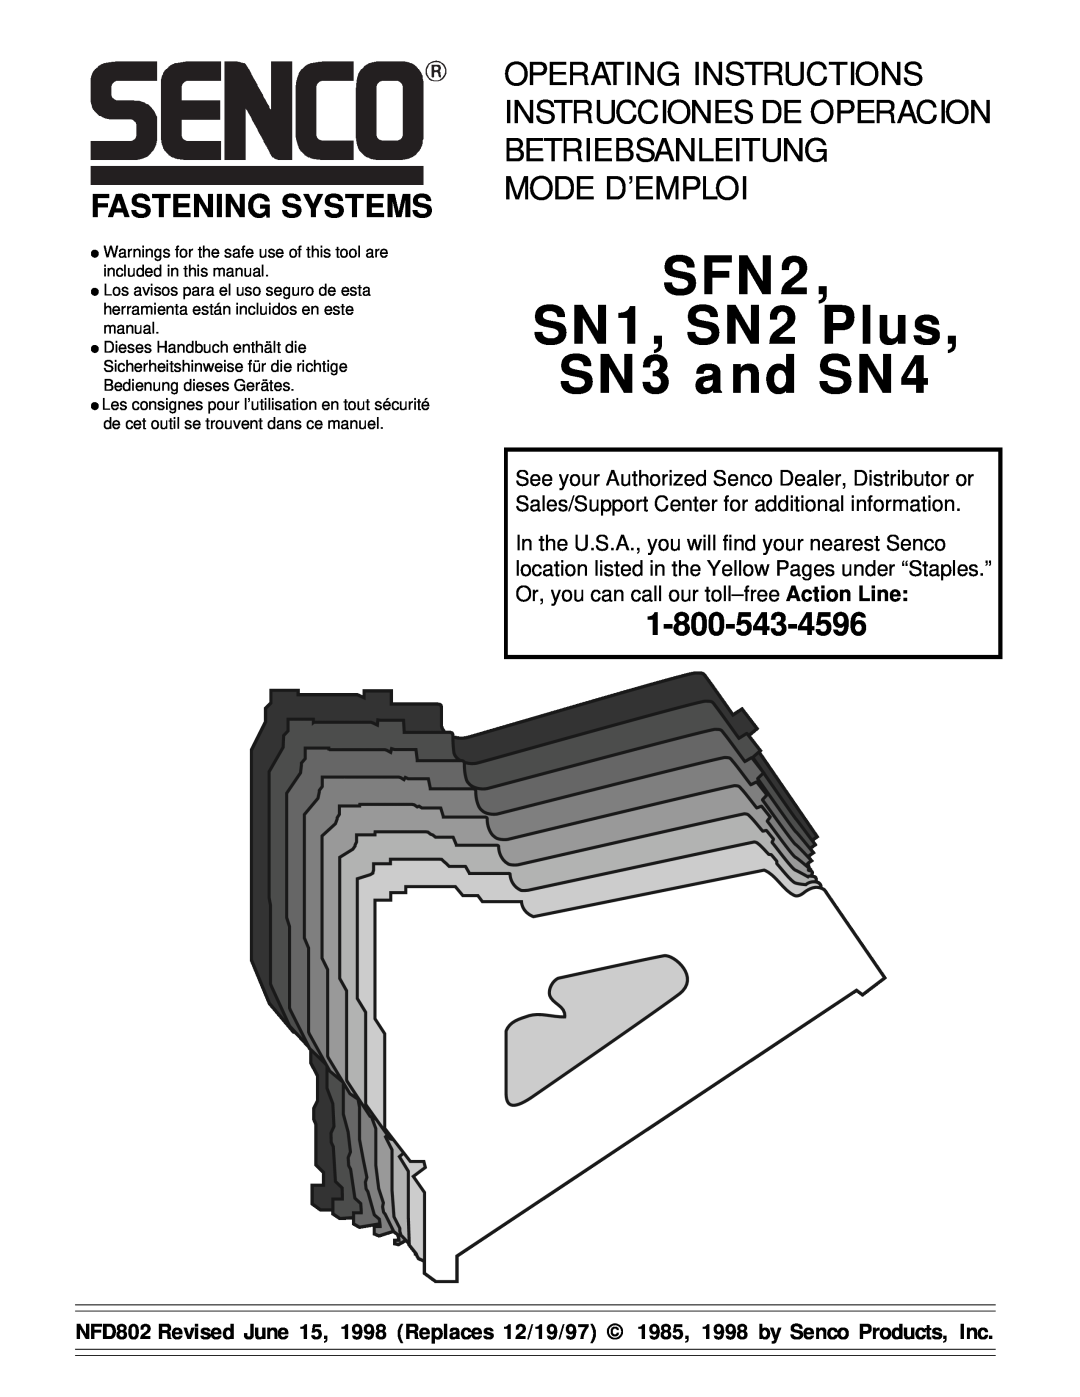 Senco operating instructions Mode D’Emploi, SFN2 SN1, SN2 Plus SN3 and SN4, Fastening Systems 